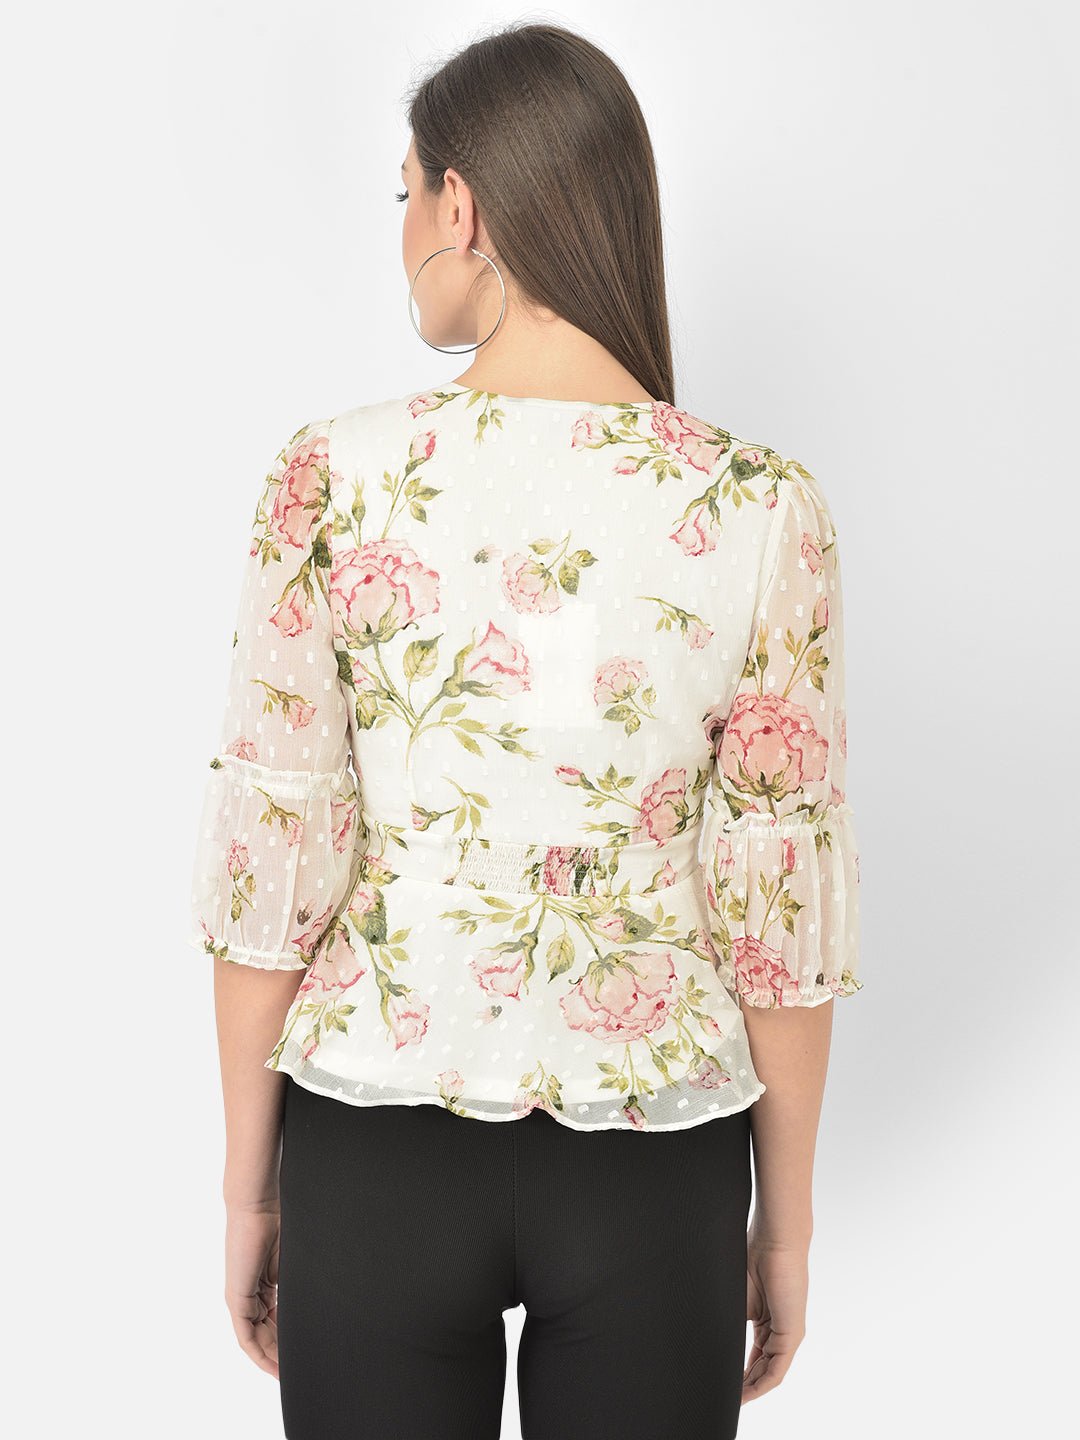 Ivory Floral Printed V-Neck With Puffer Sleeves Peplum Top